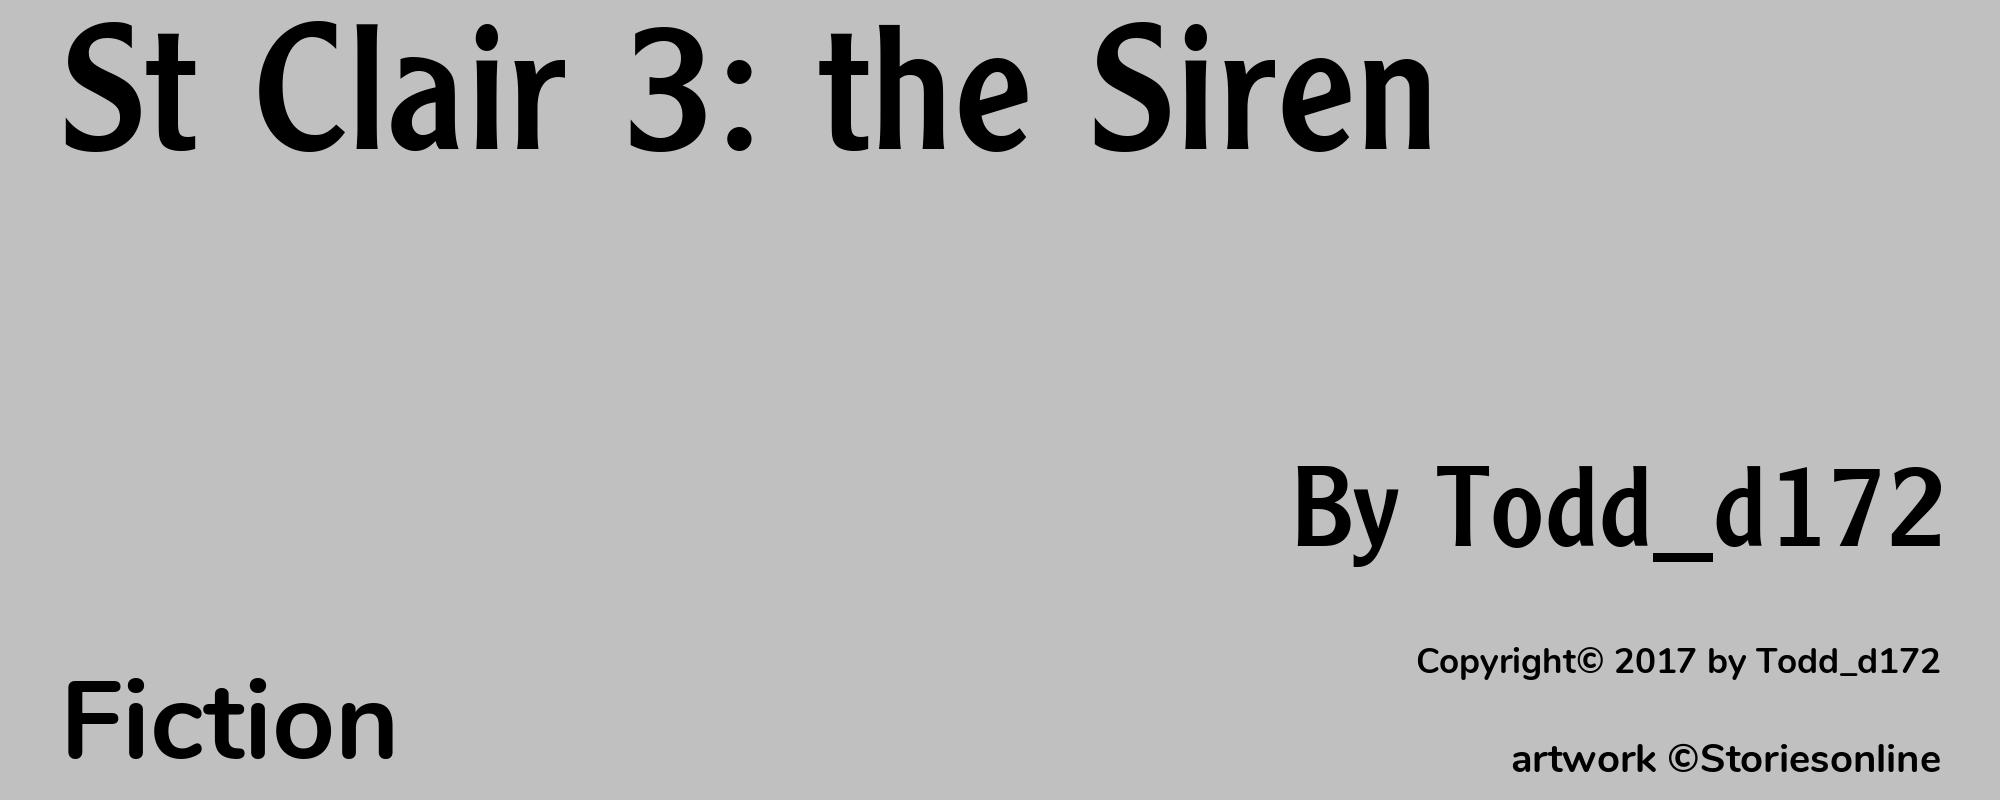 St Clair 3: the Siren - Cover